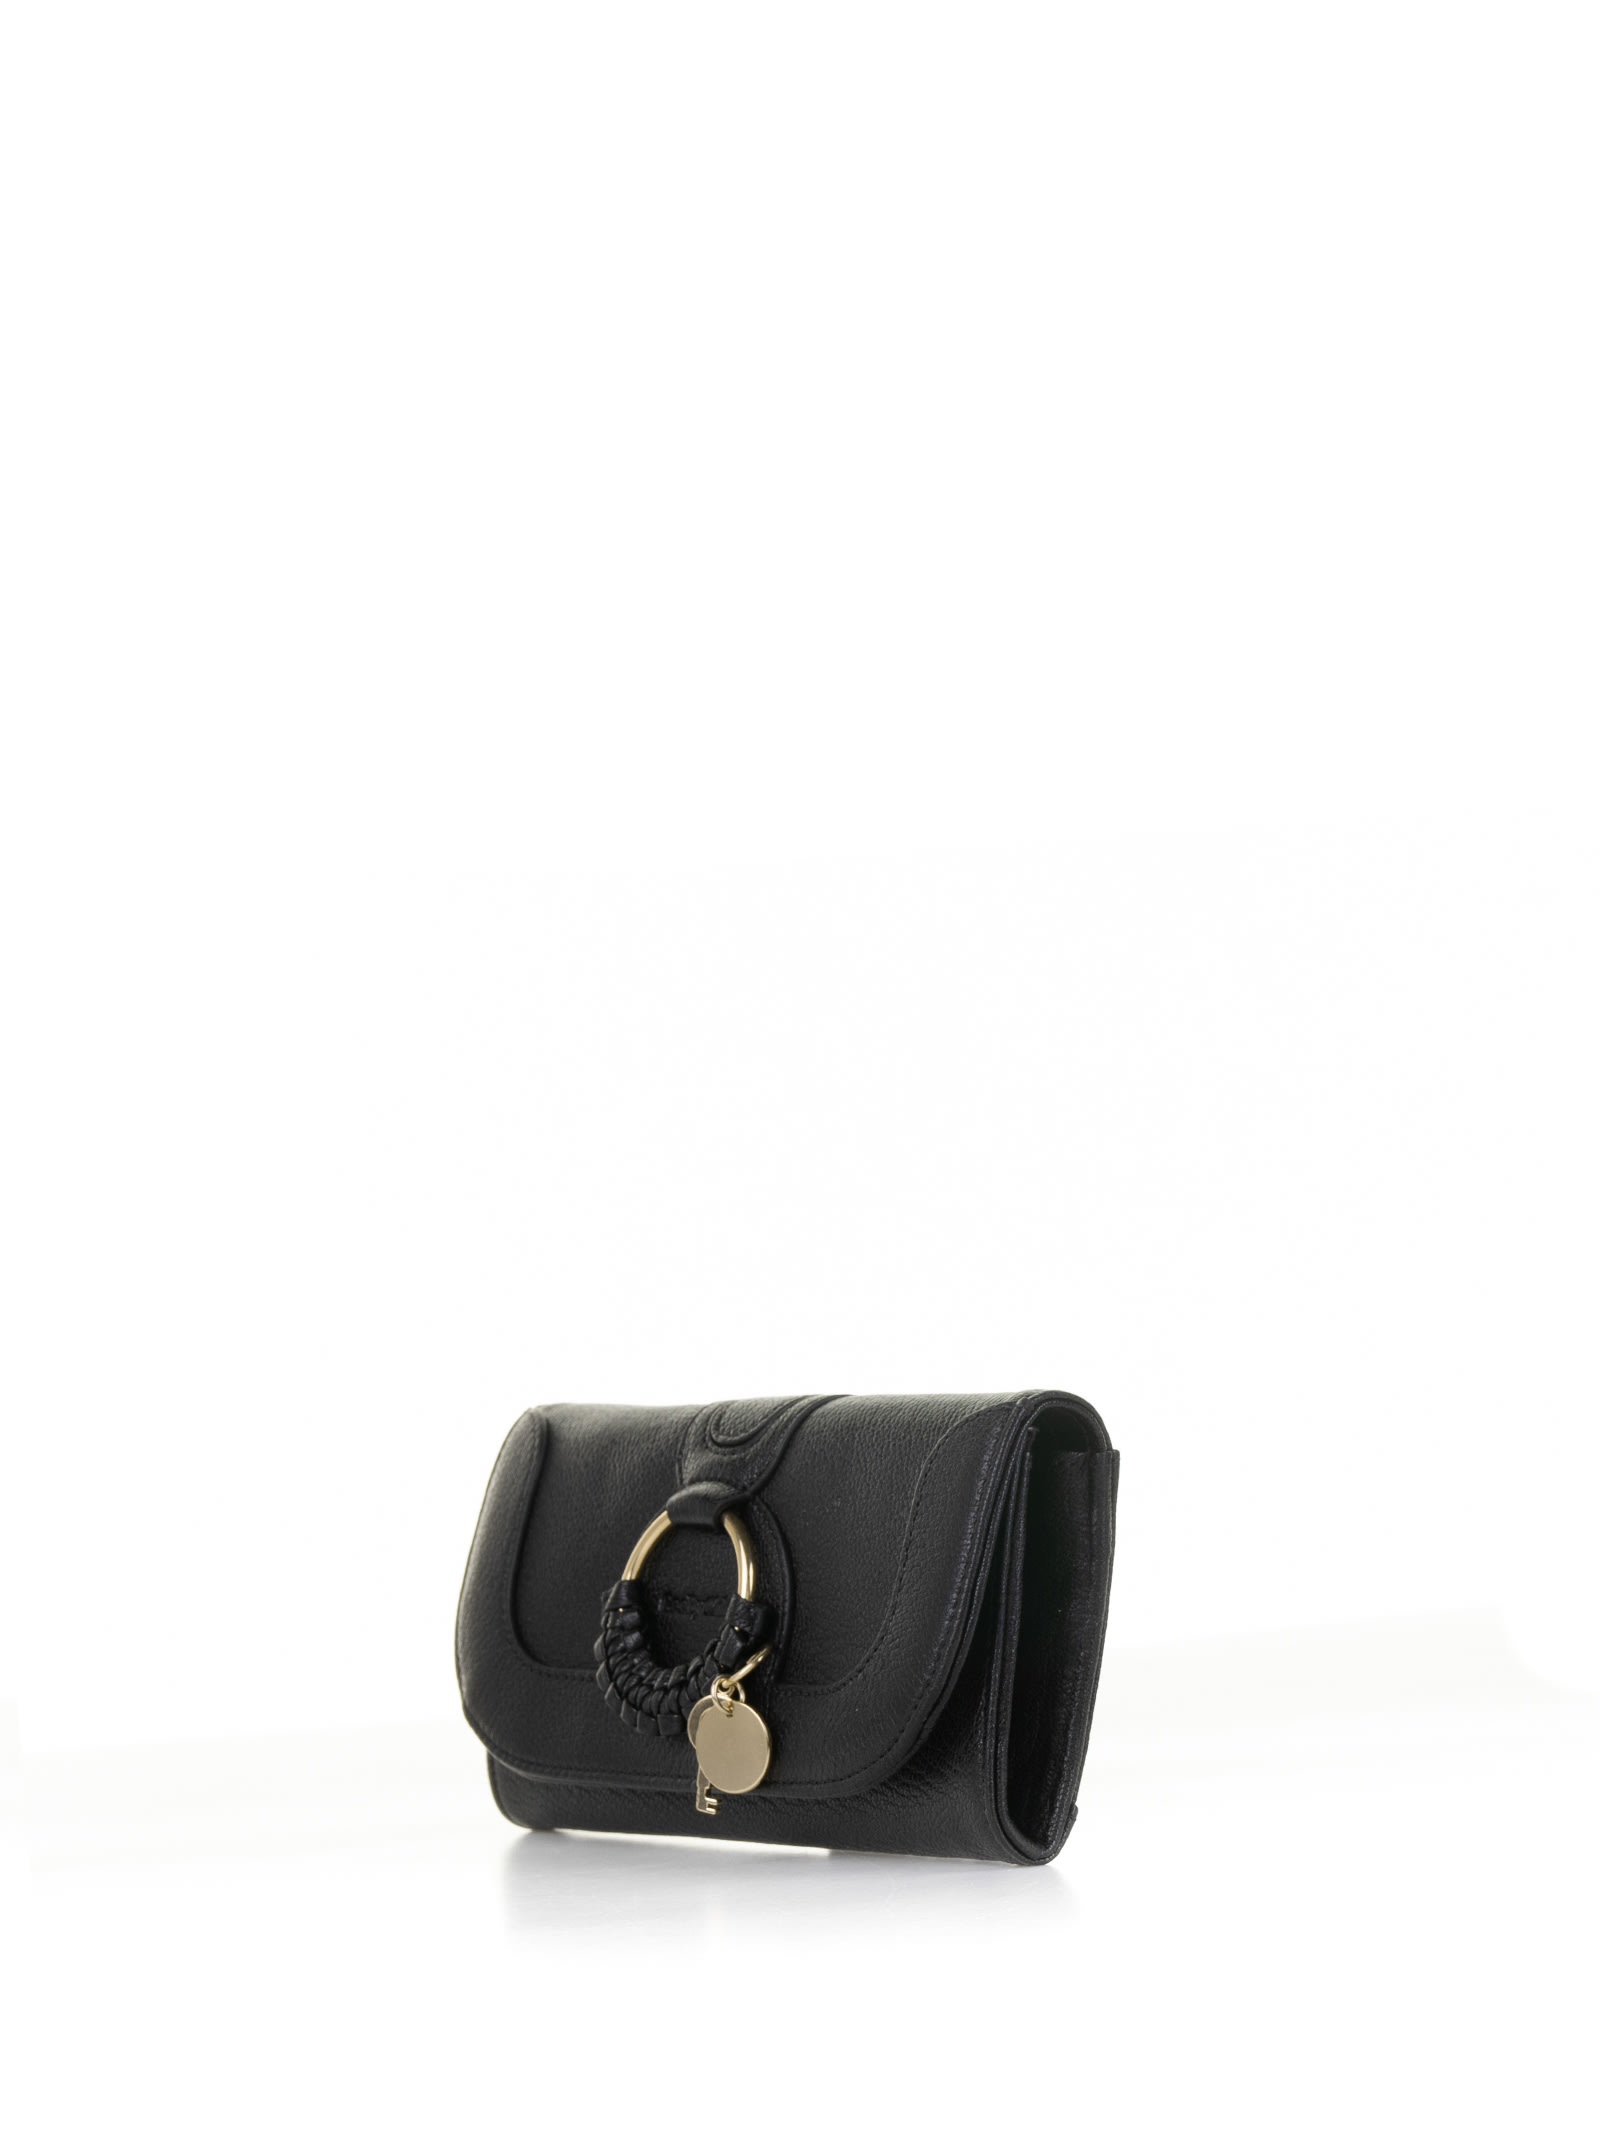 Shop See By Chloé Hana Black Leather Wallet